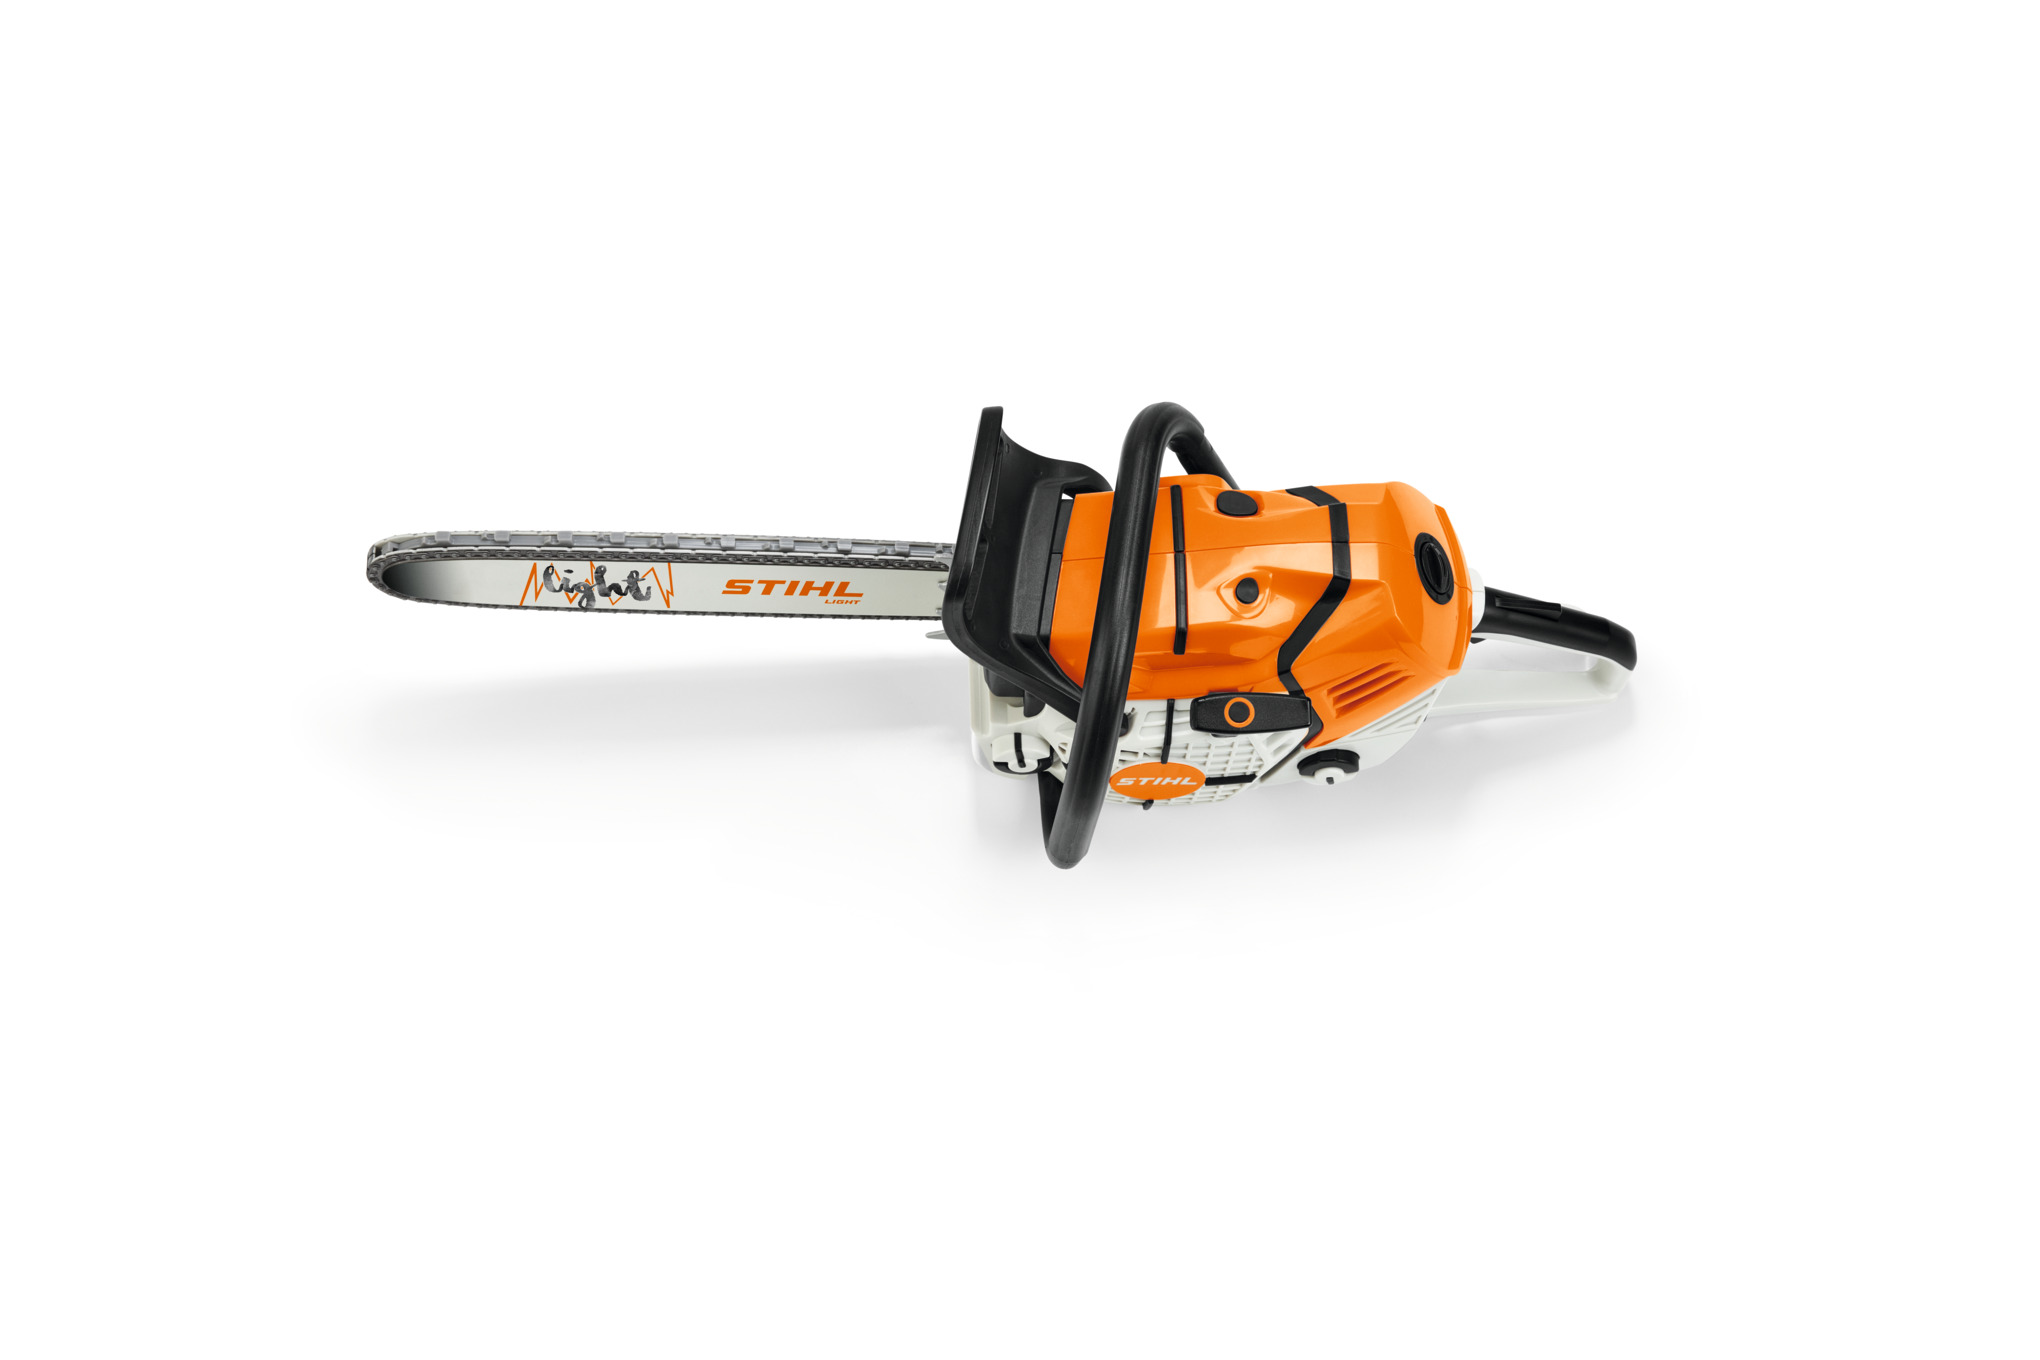 Children's battery-operated MS 500i toy chainsaw